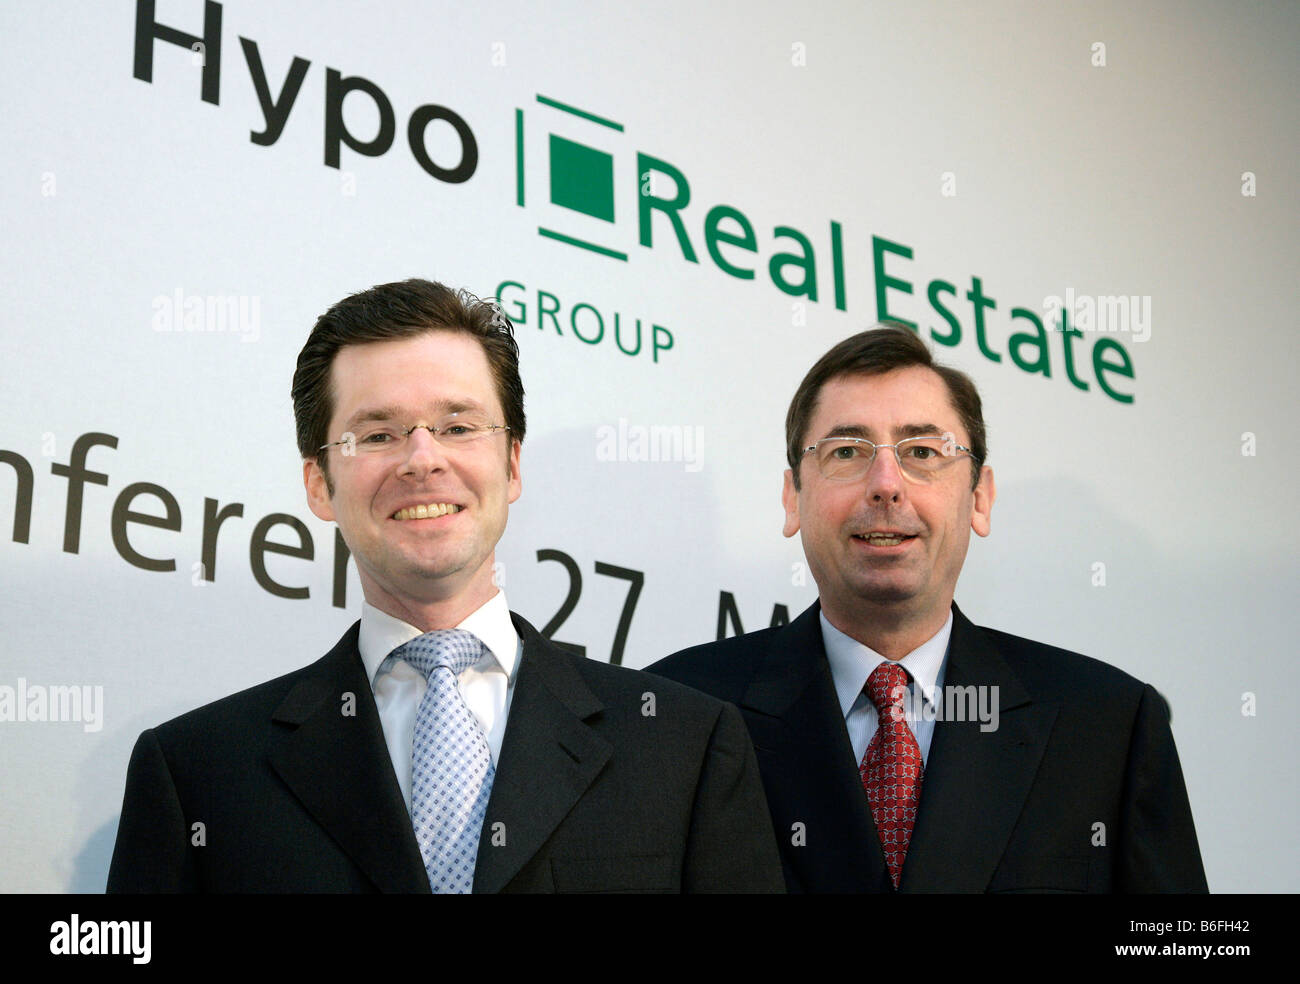 Georg Funke, chairman of the Hypo Real Estate Holding AG, at right, and Markus Fell, the Finance Director, during the press con Stock Photo